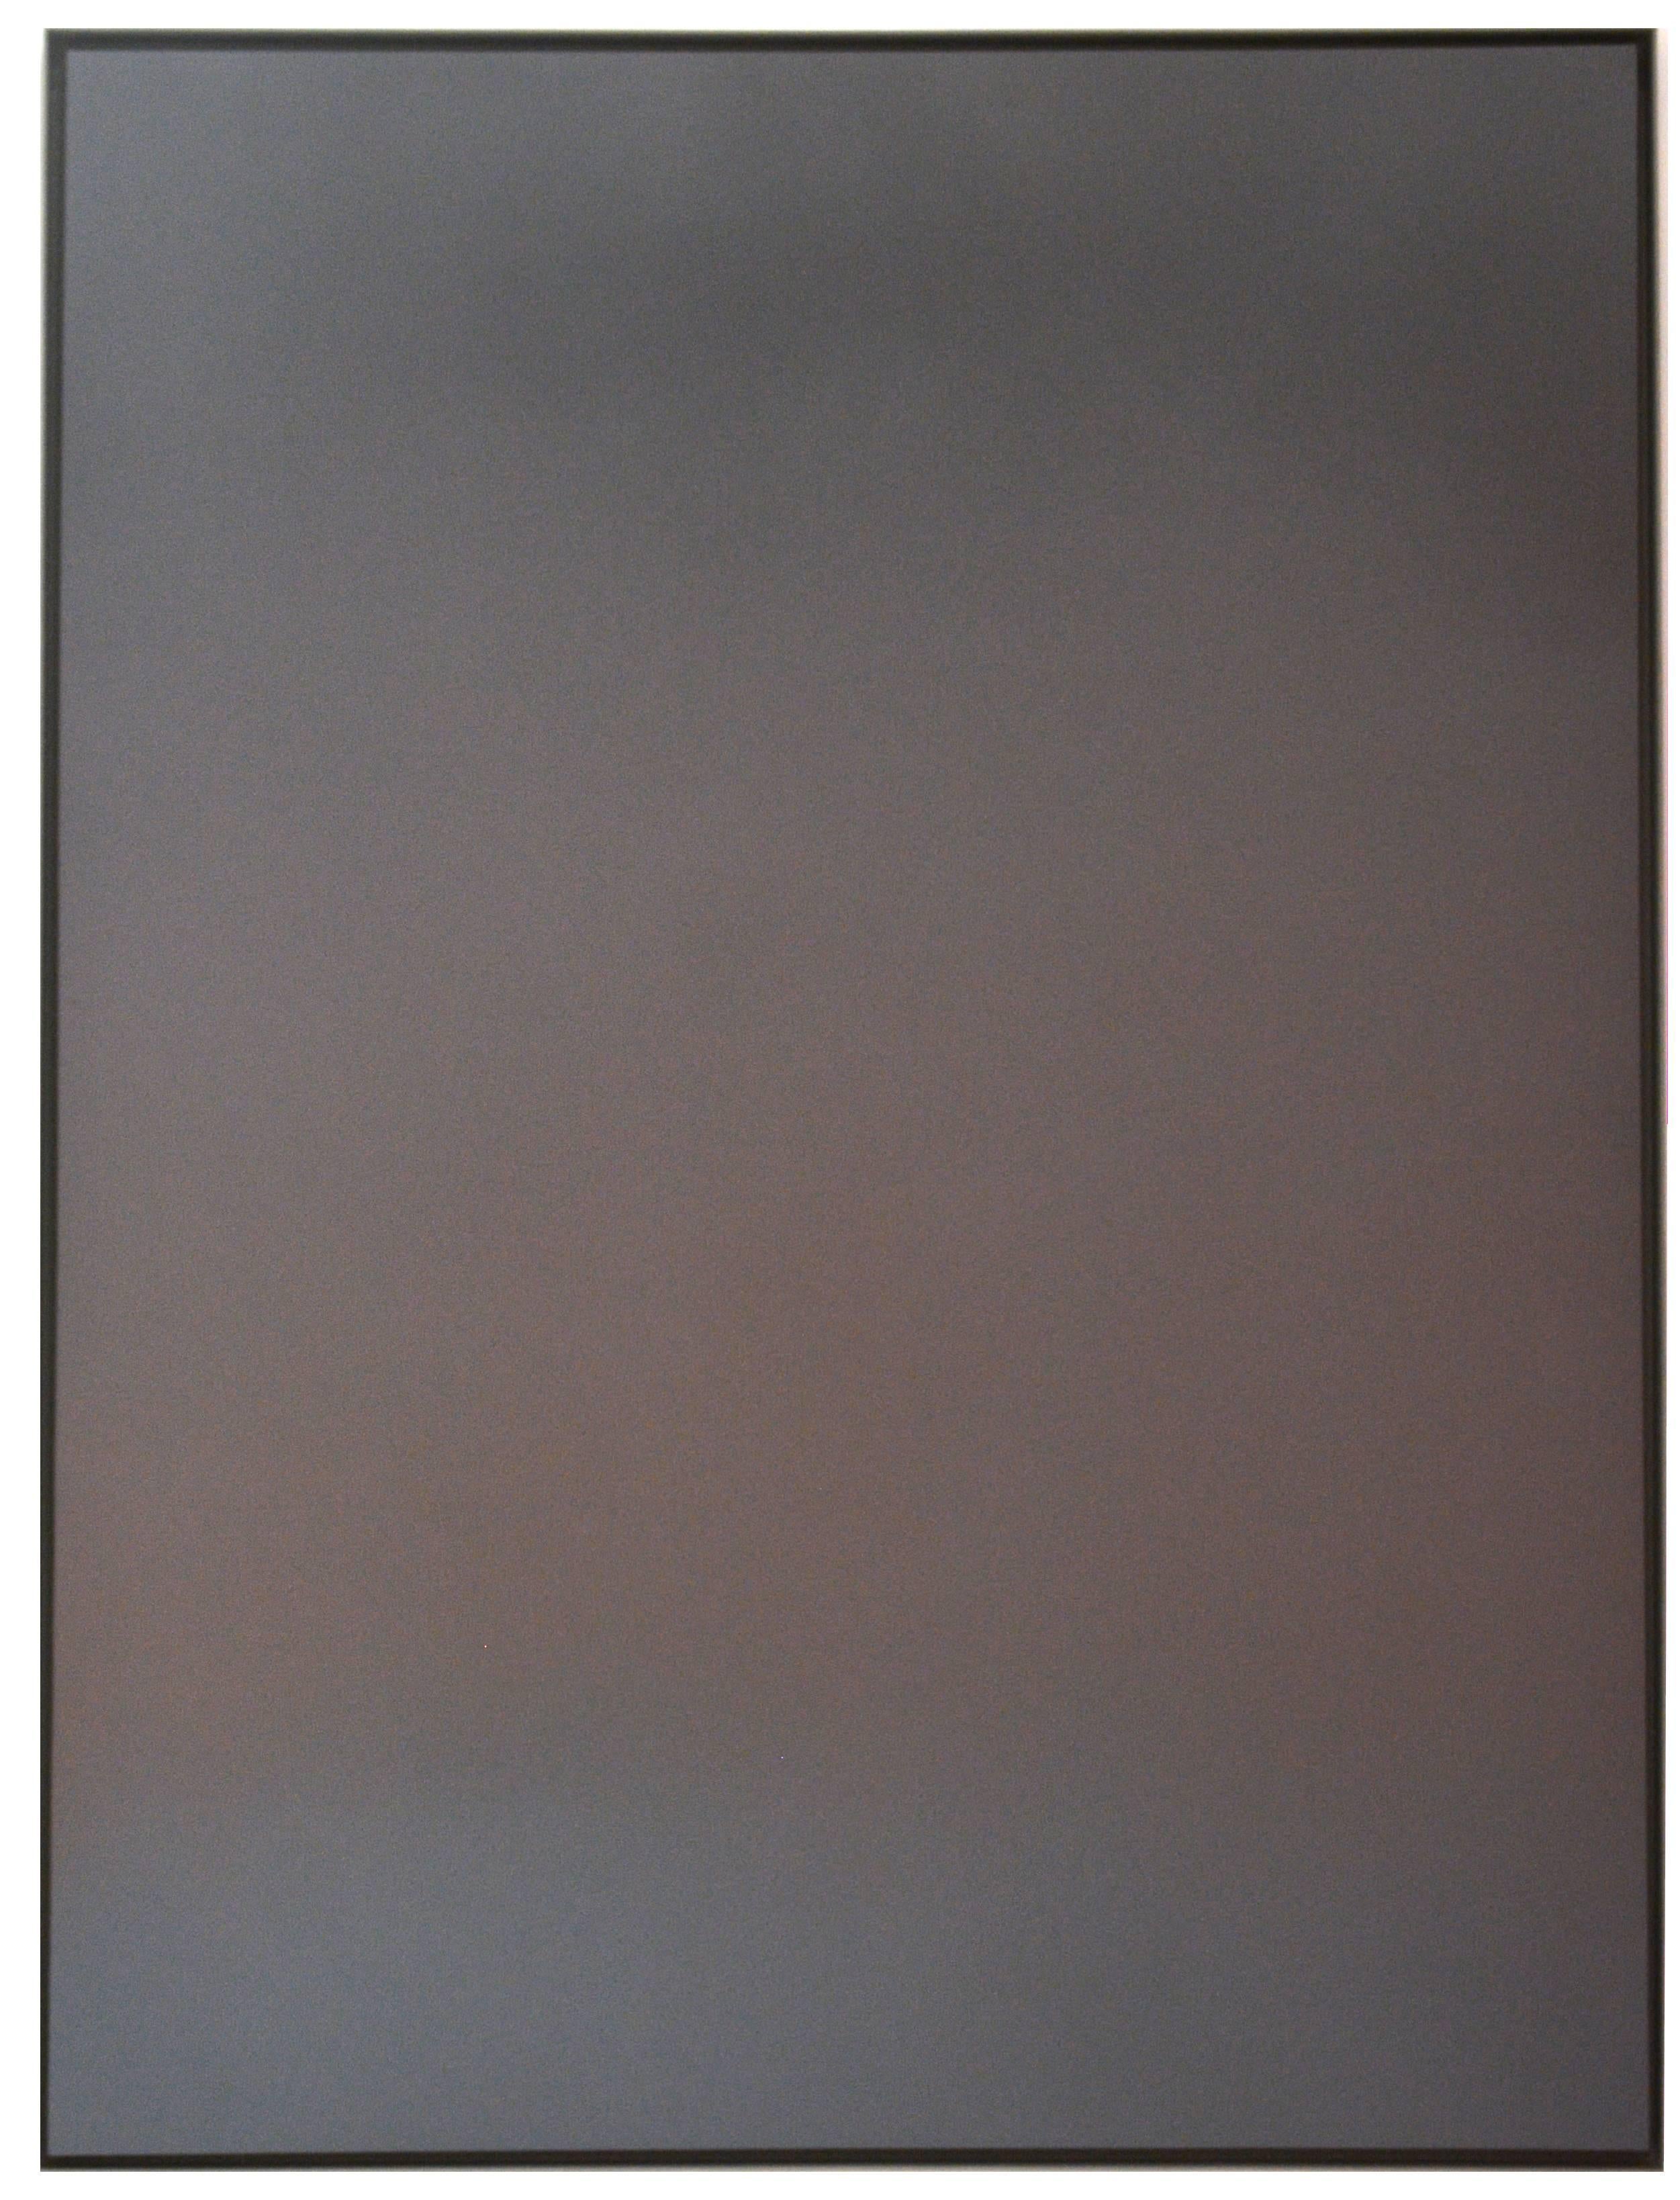 A tribute to the paintings of Mark Rothko, Isaac Aden’s 'Untitled (For Rothko)' softly blends Aden’s signature grey and orange in an abstract expressionist exploration of color. Aden’s continued use of industrial orange and grey creates a unified